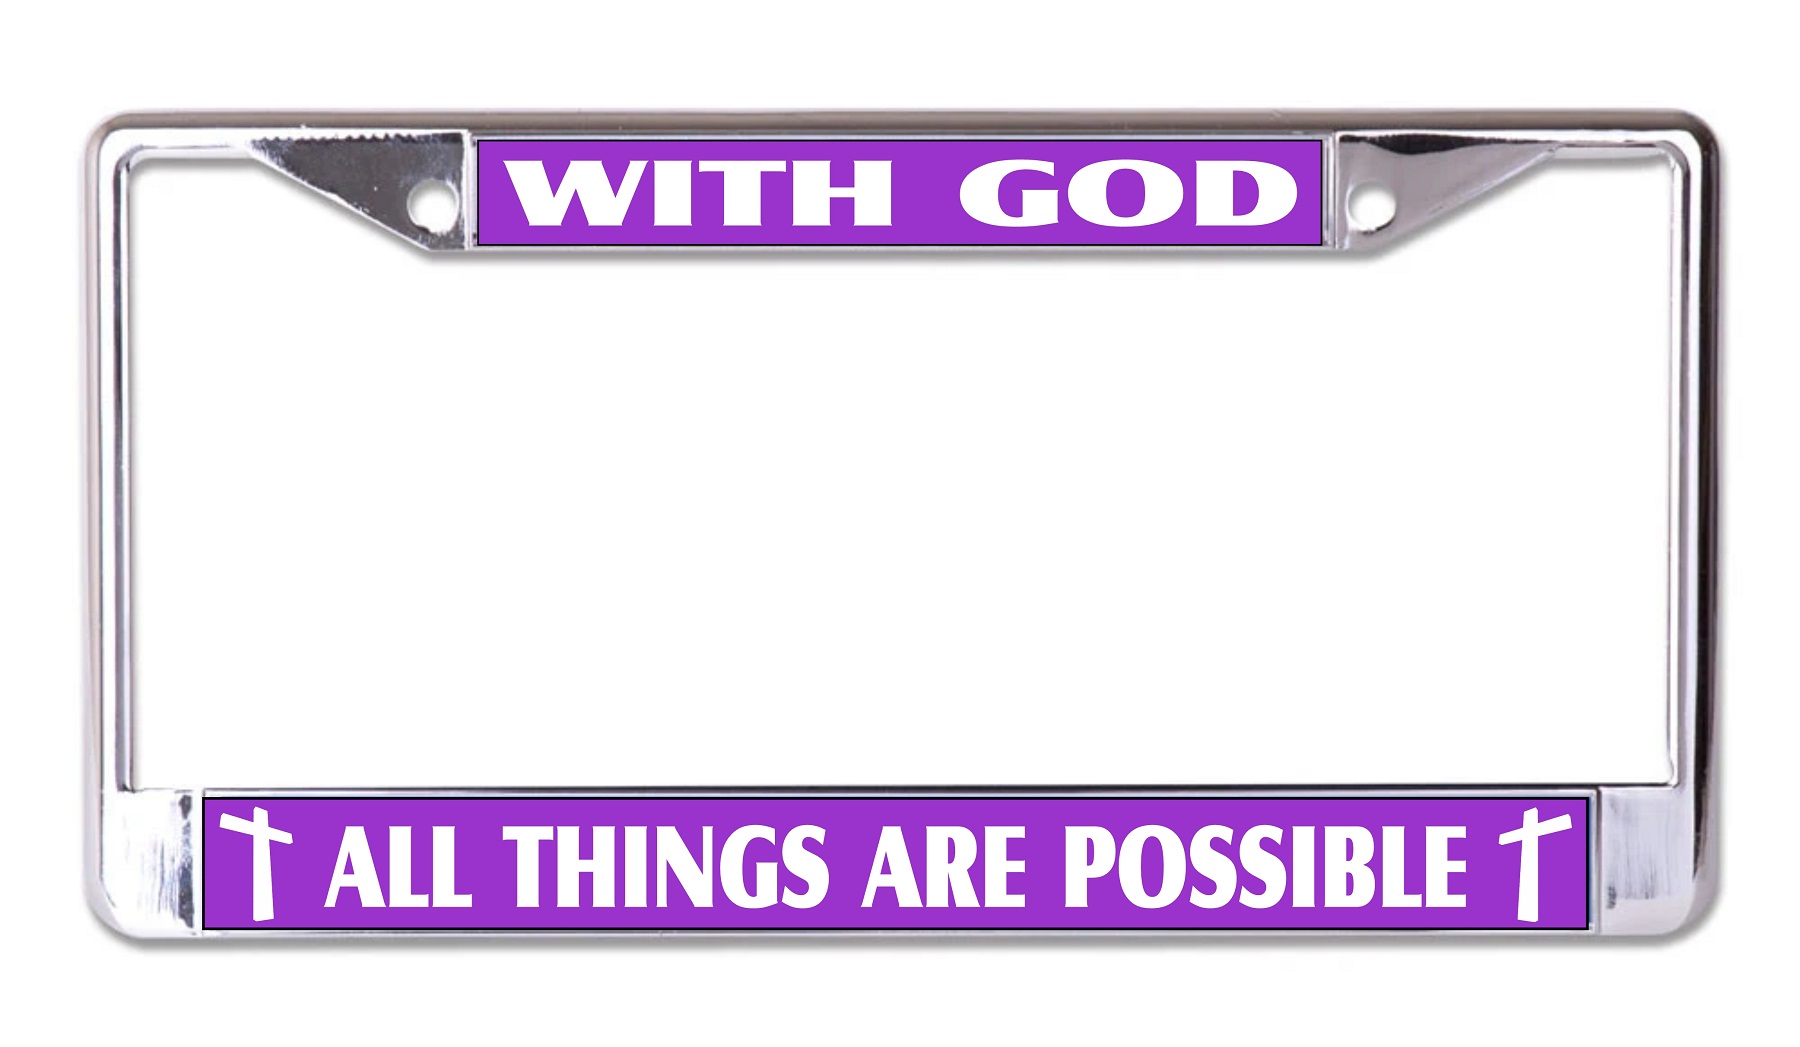 With God All Things Are Possible on Purple Chrome License Plate FRAME